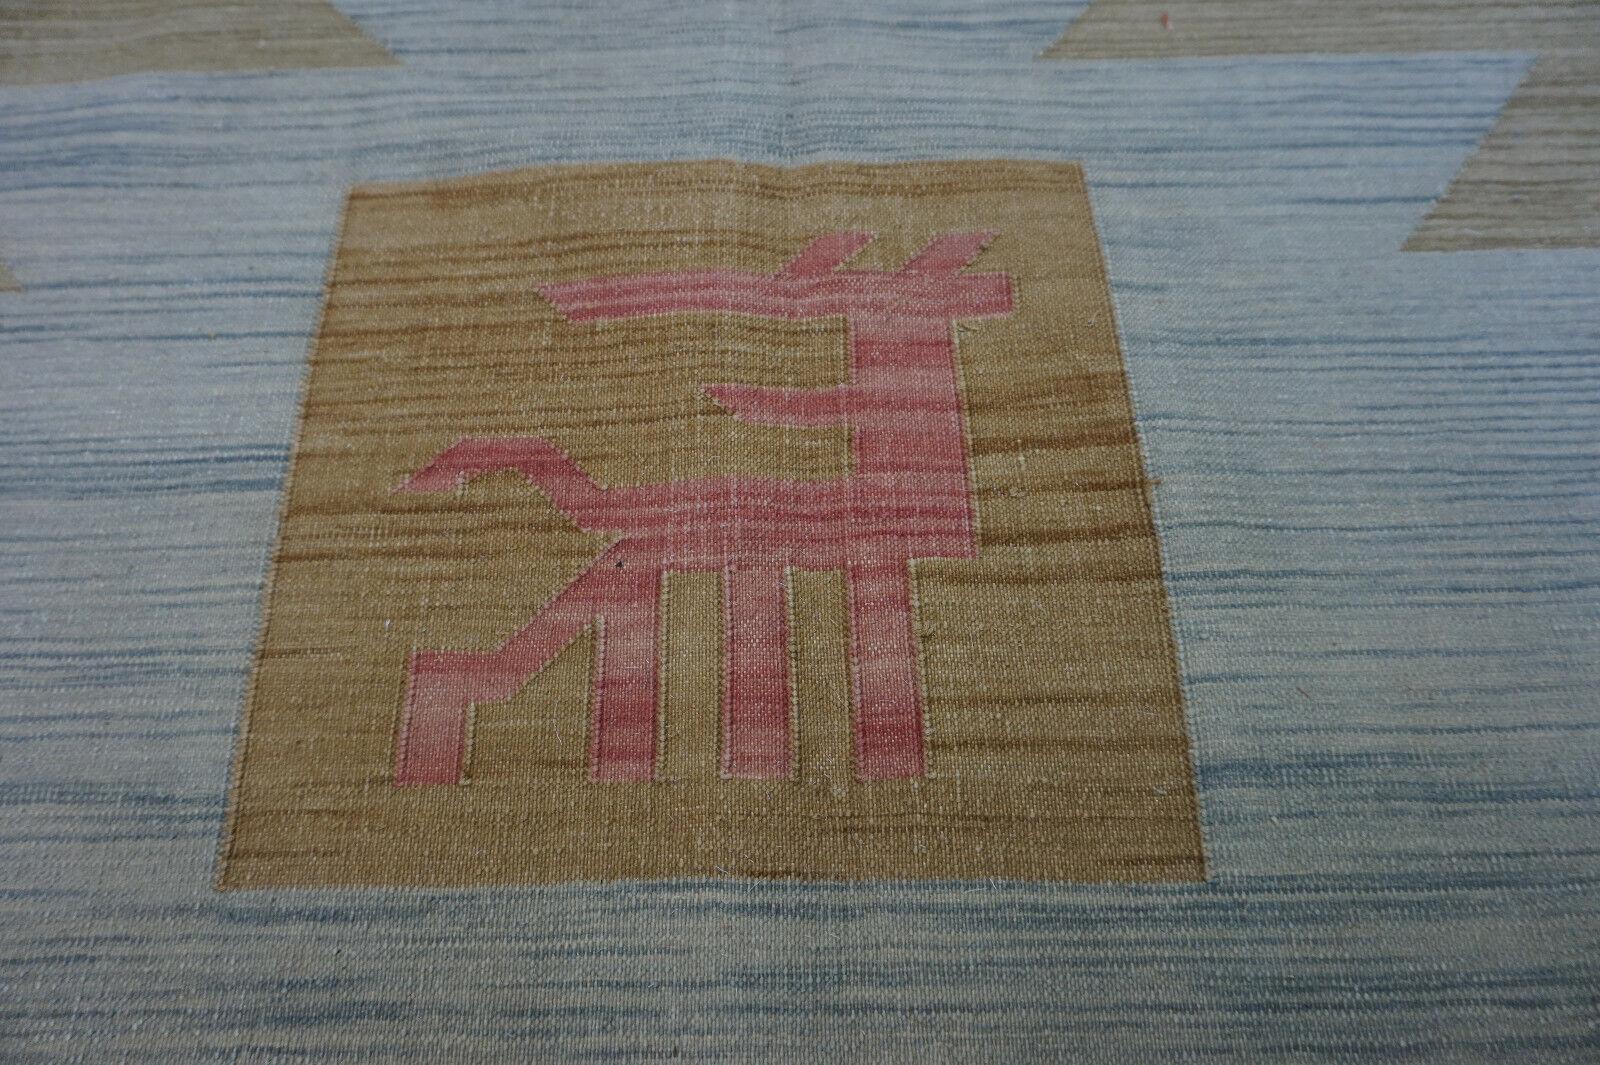 Handmade Vintage Indian Dhurrie Kilim Rug 6.5' x 8.2', 1970s - 1D45 In Good Condition For Sale In Bordeaux, FR